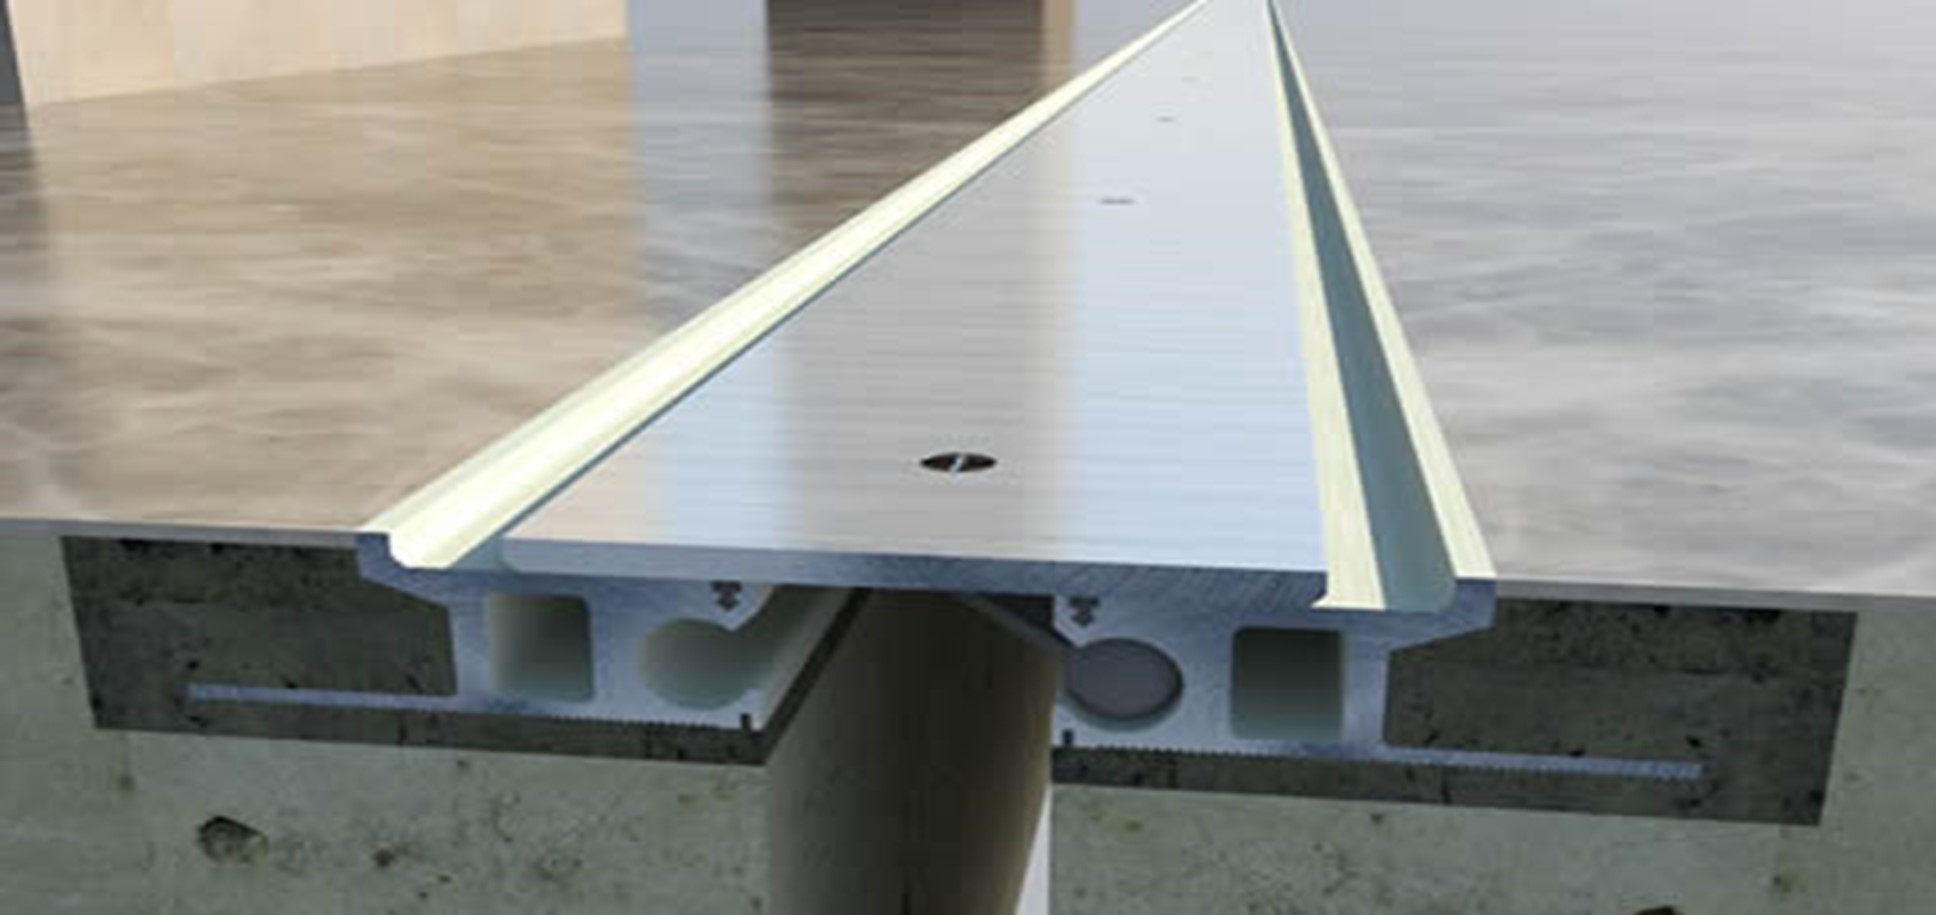 Two Floor Expansion Joint Products for High-End Mixed-Use Development by Unison Joints